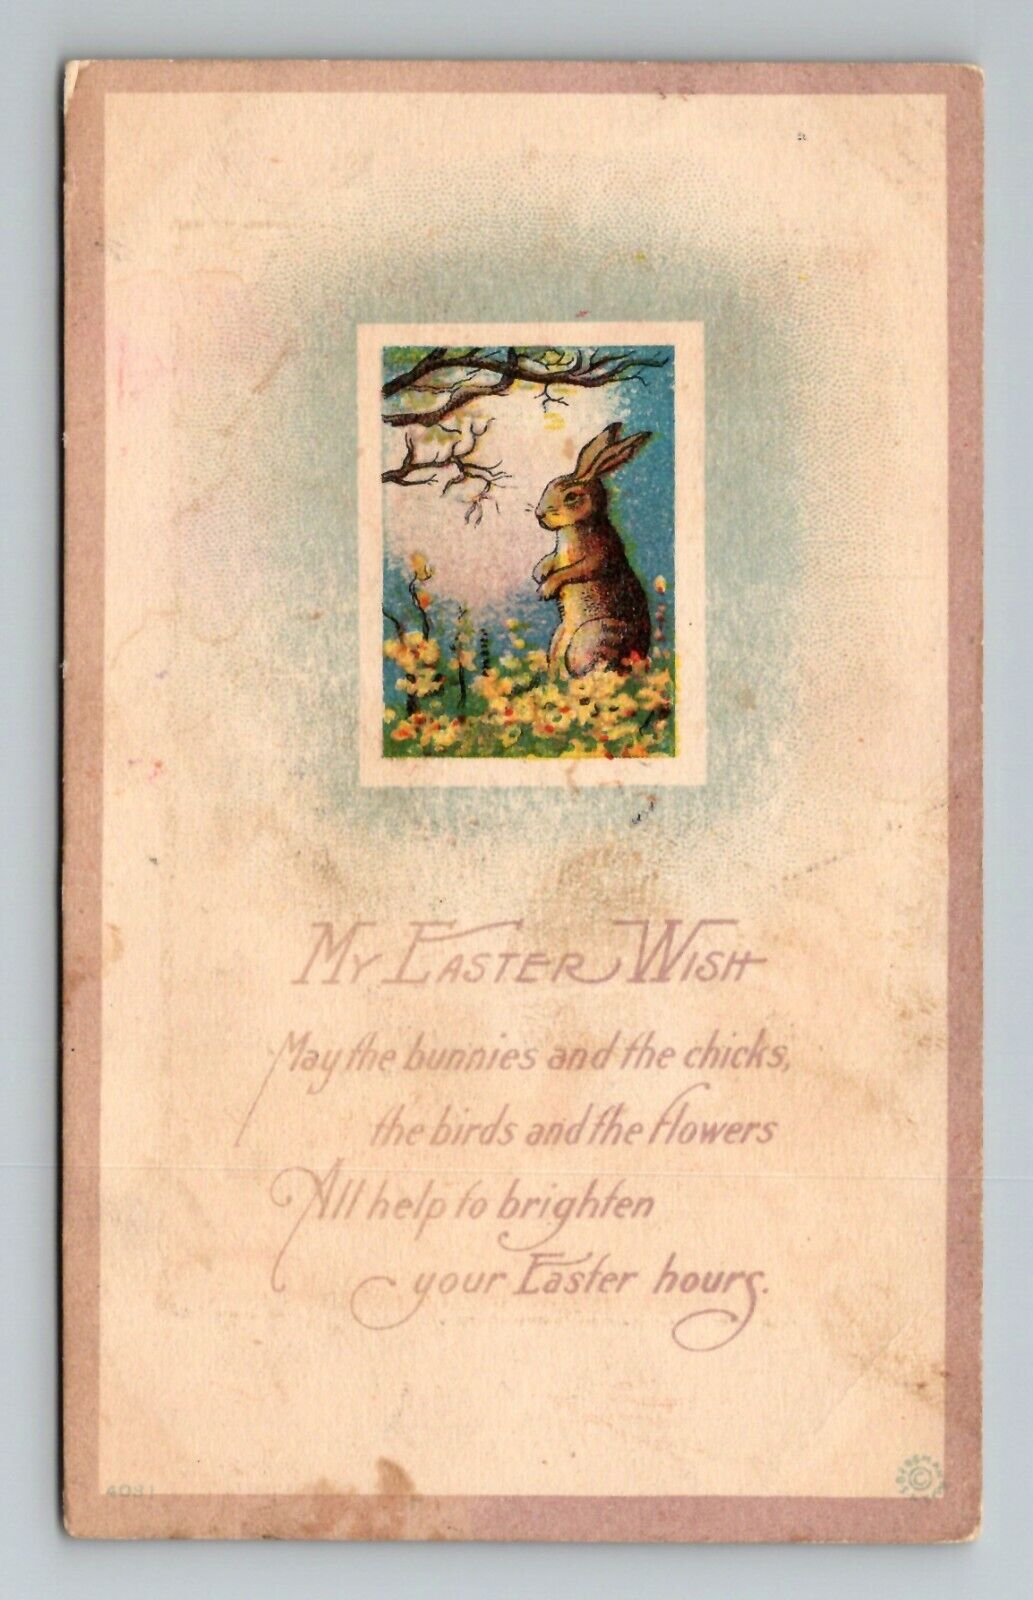 Vintage My Easter Wish written posted postcard 192 Washington 1 cent stamp